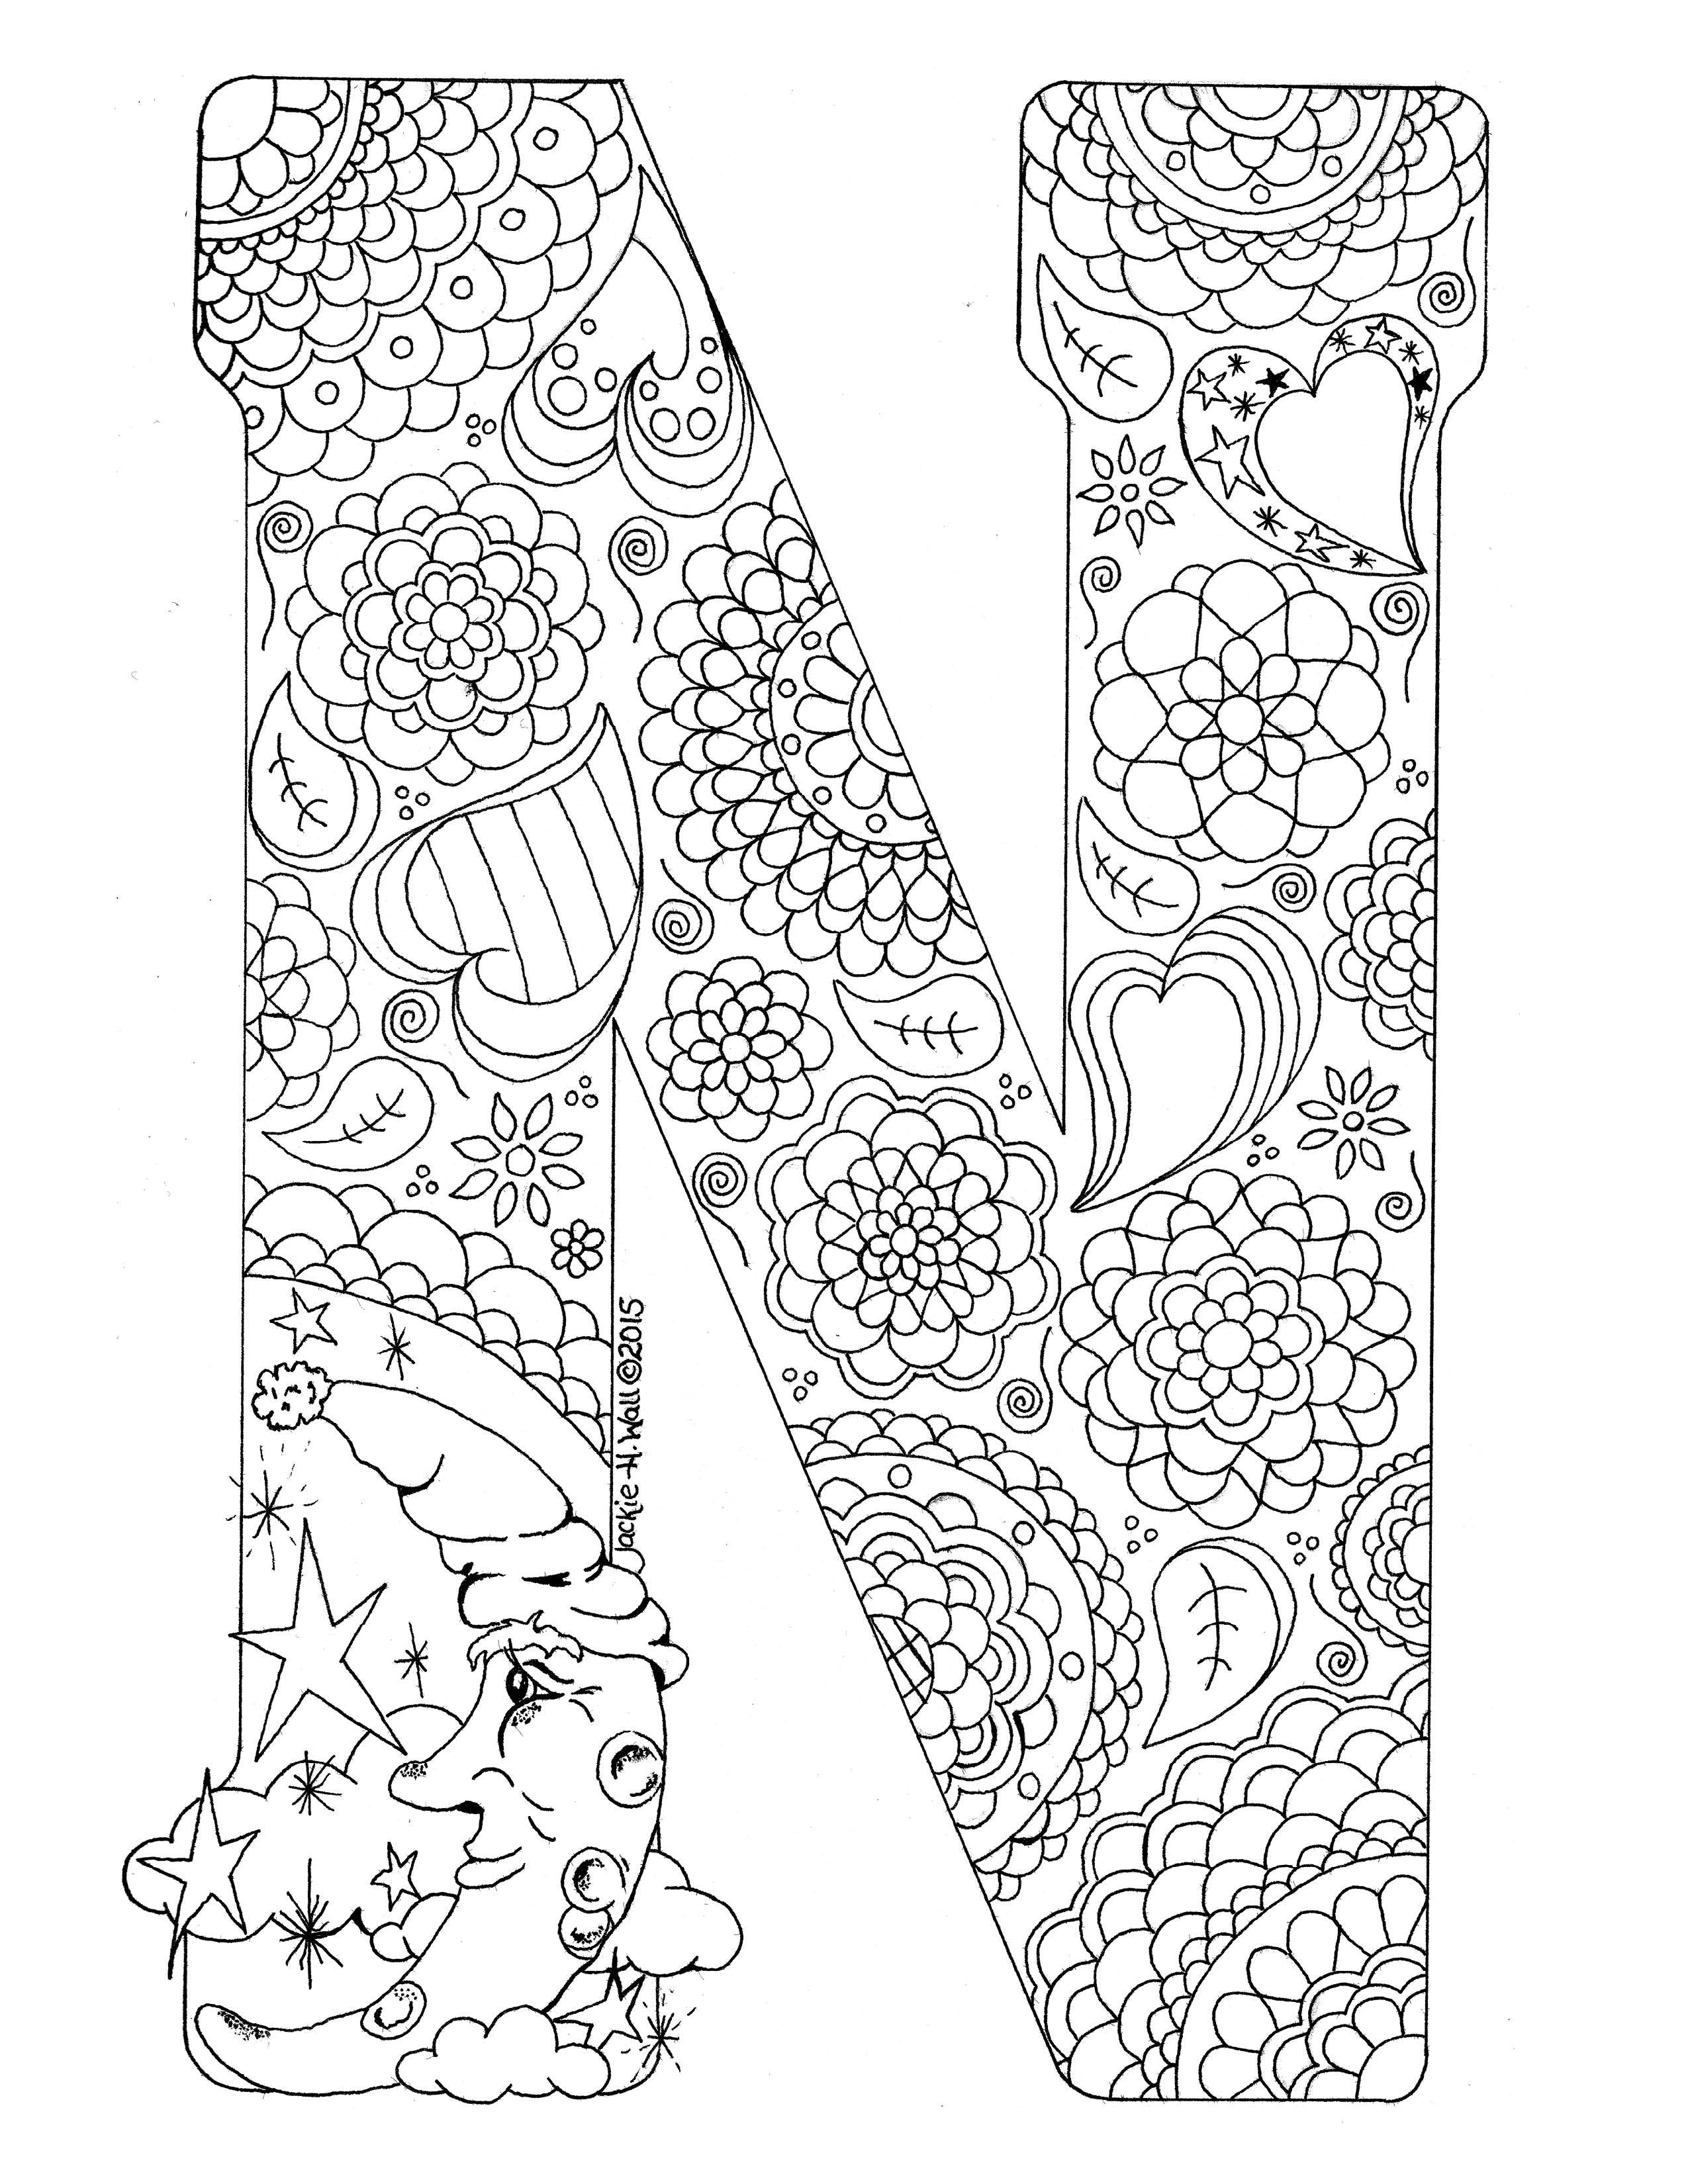 Download Letter N Colouring Page - Jackie Wall Studio